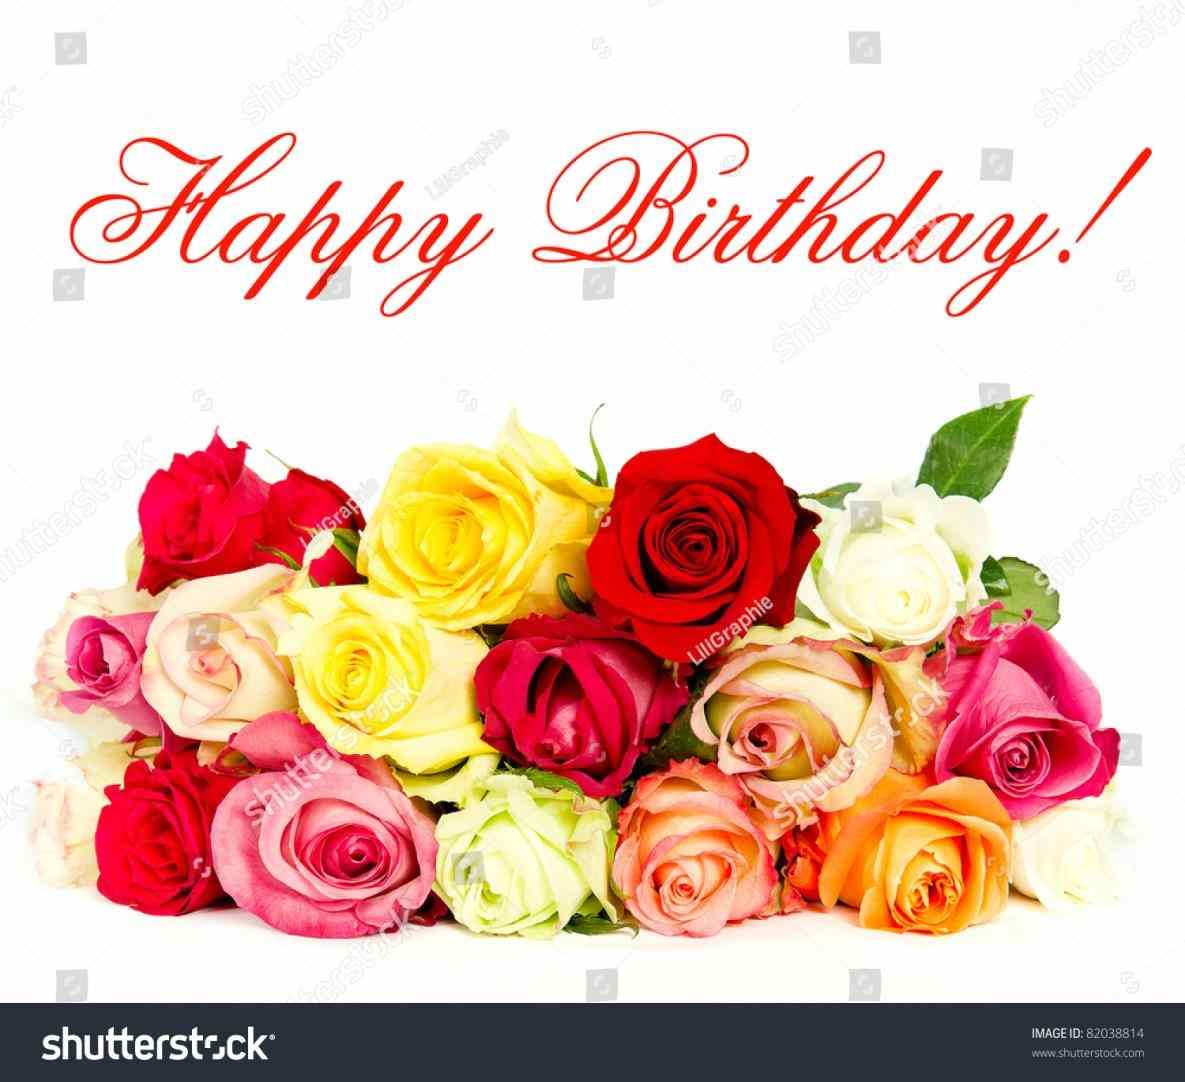 Bouquet clipart happy birthday. Colorful roses beautiful flower